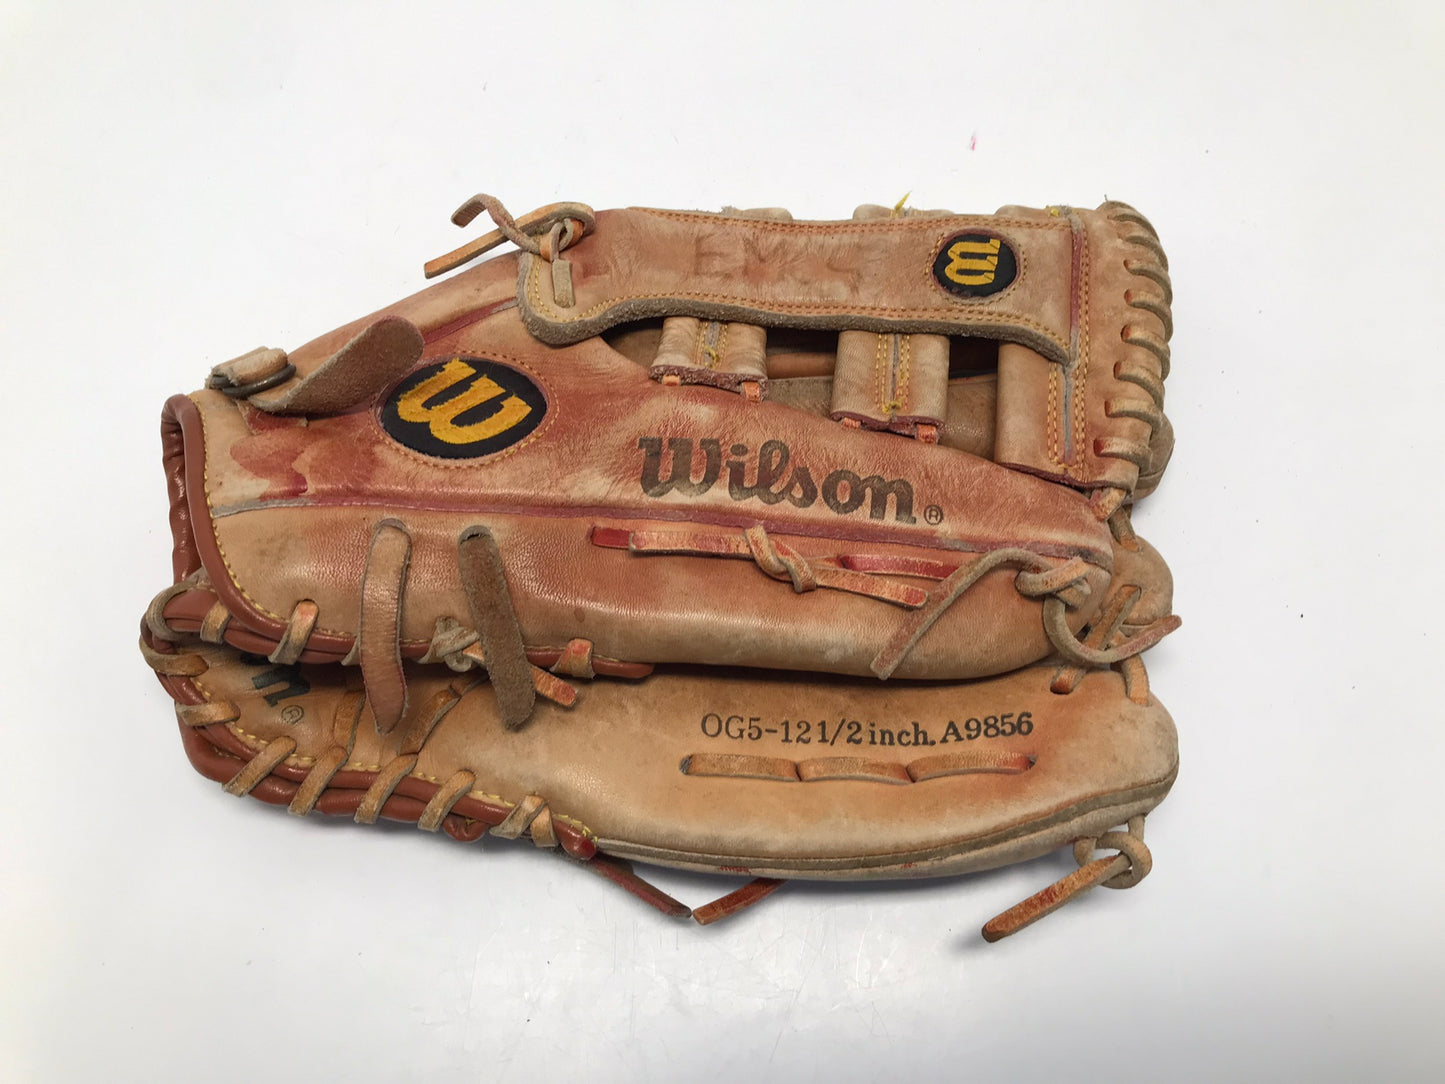 Baseball Glove Adult Size 12.5 inch Wilson Gold Series Leather Fits on Left Hand